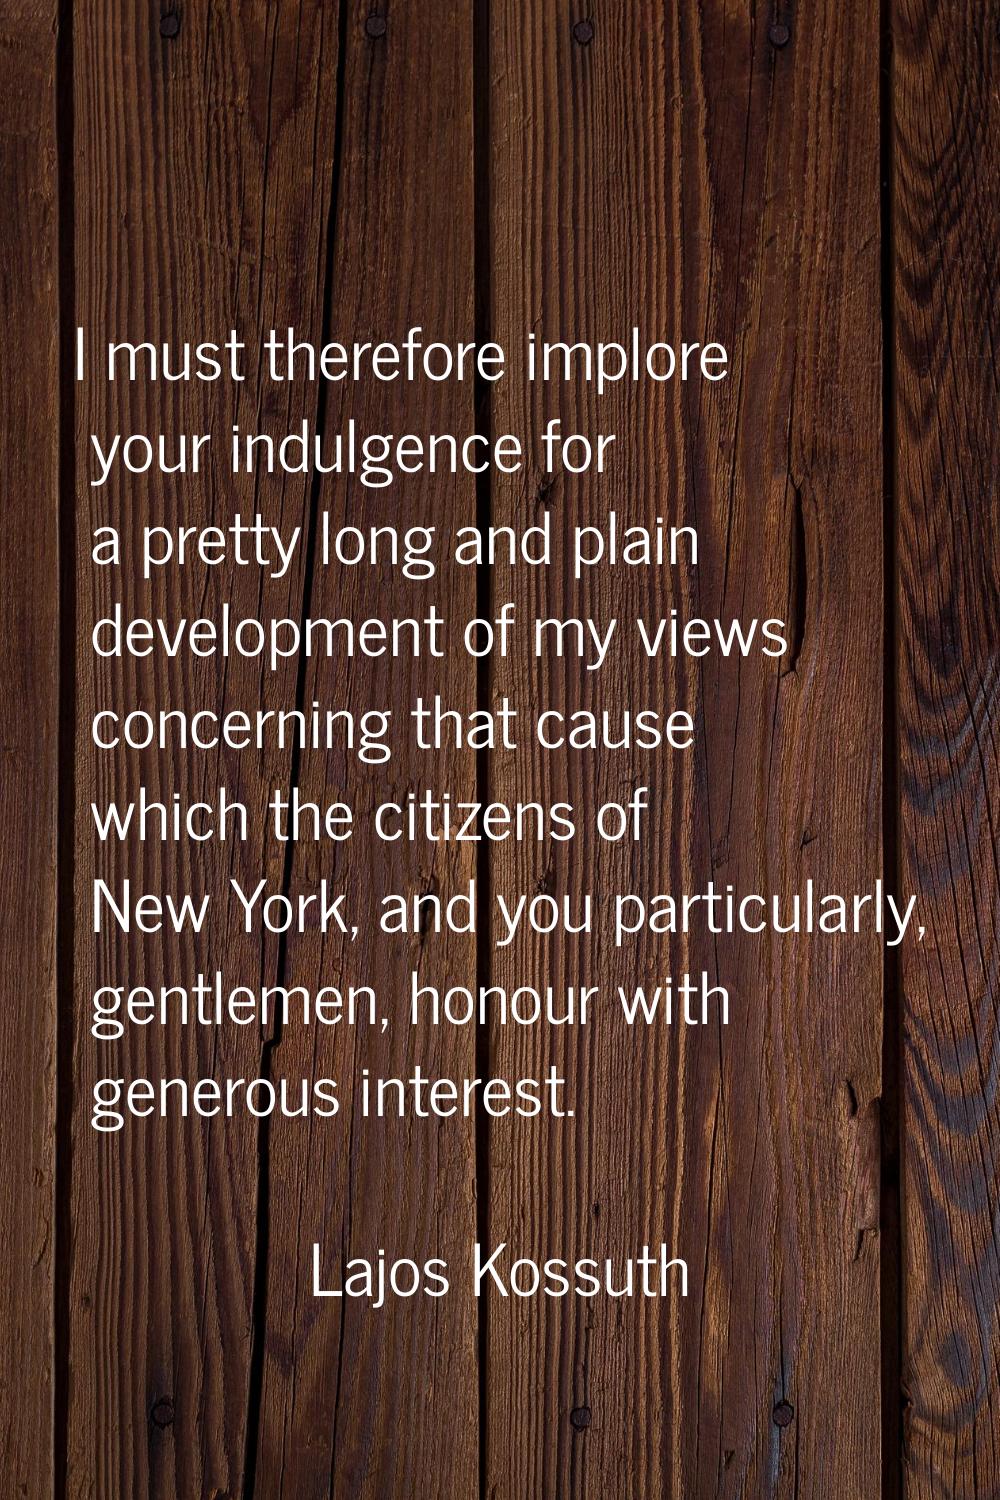 I must therefore implore your indulgence for a pretty long and plain development of my views concer